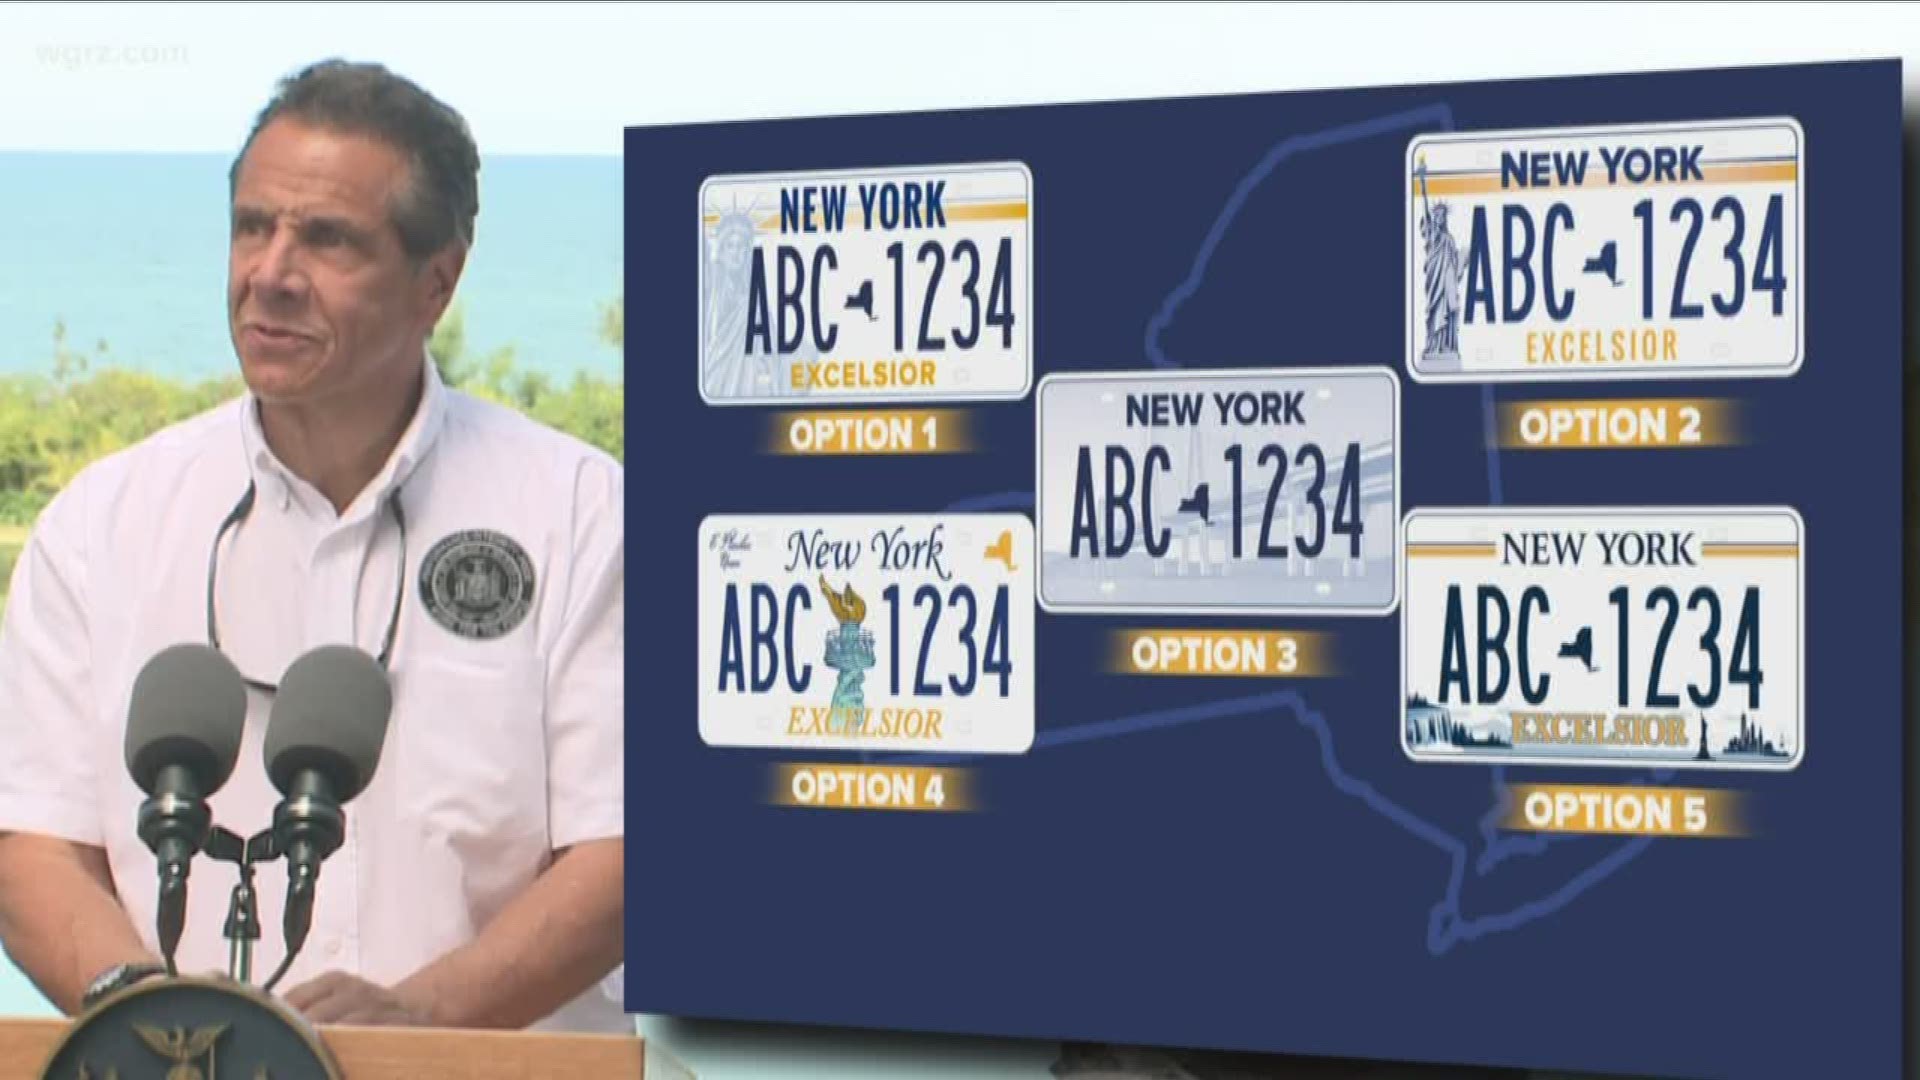 Republicans and some Democrats are against Governor Cuomo's decision to charge New Yorker's a fee for a new license plate.